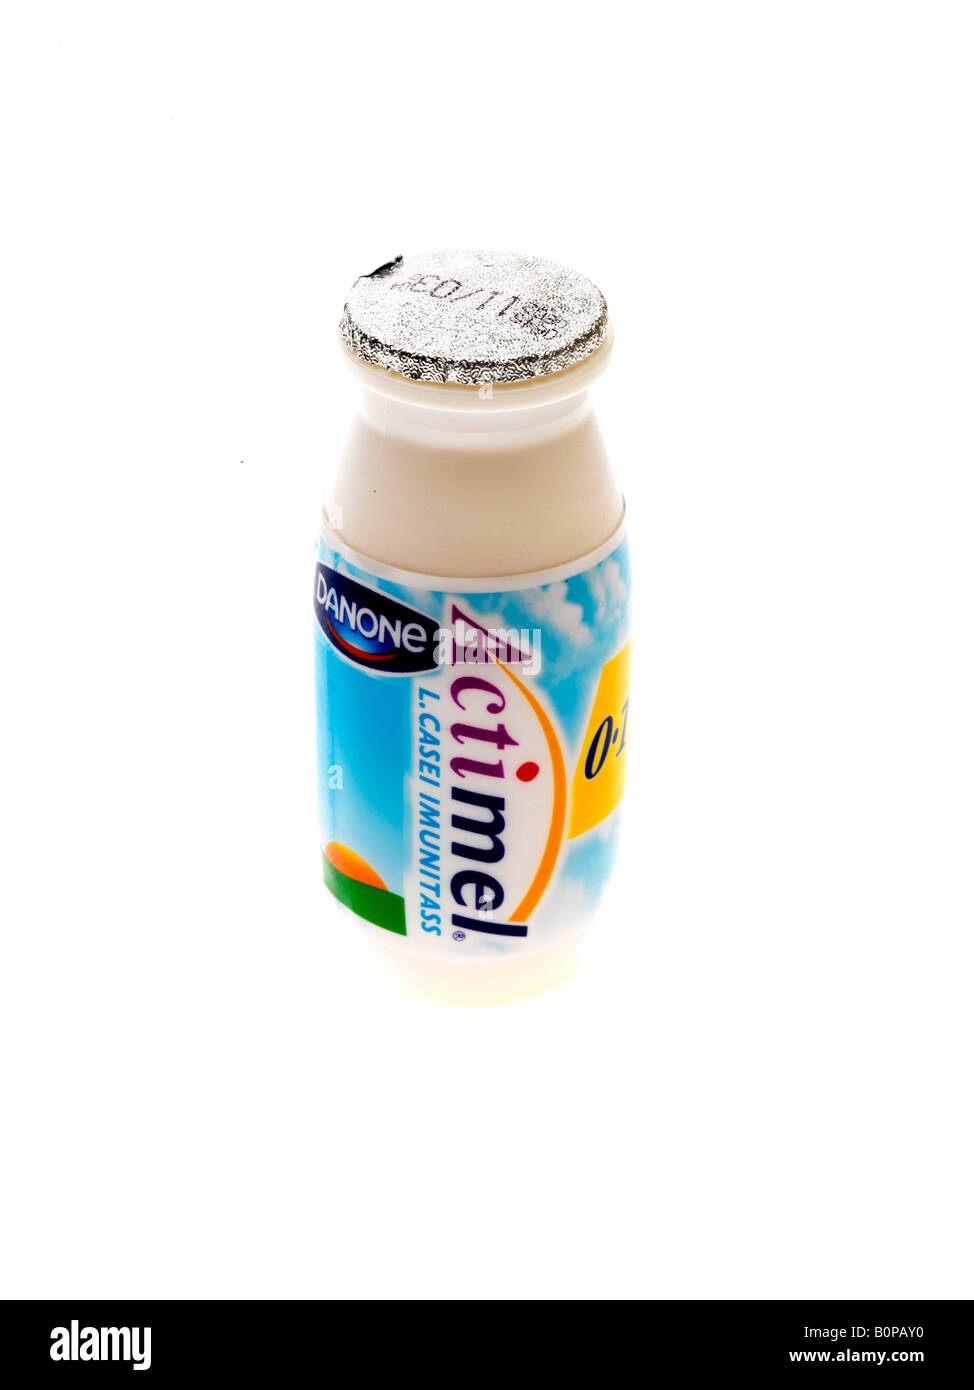 stock Alamy Actimel - images photography hi-res and